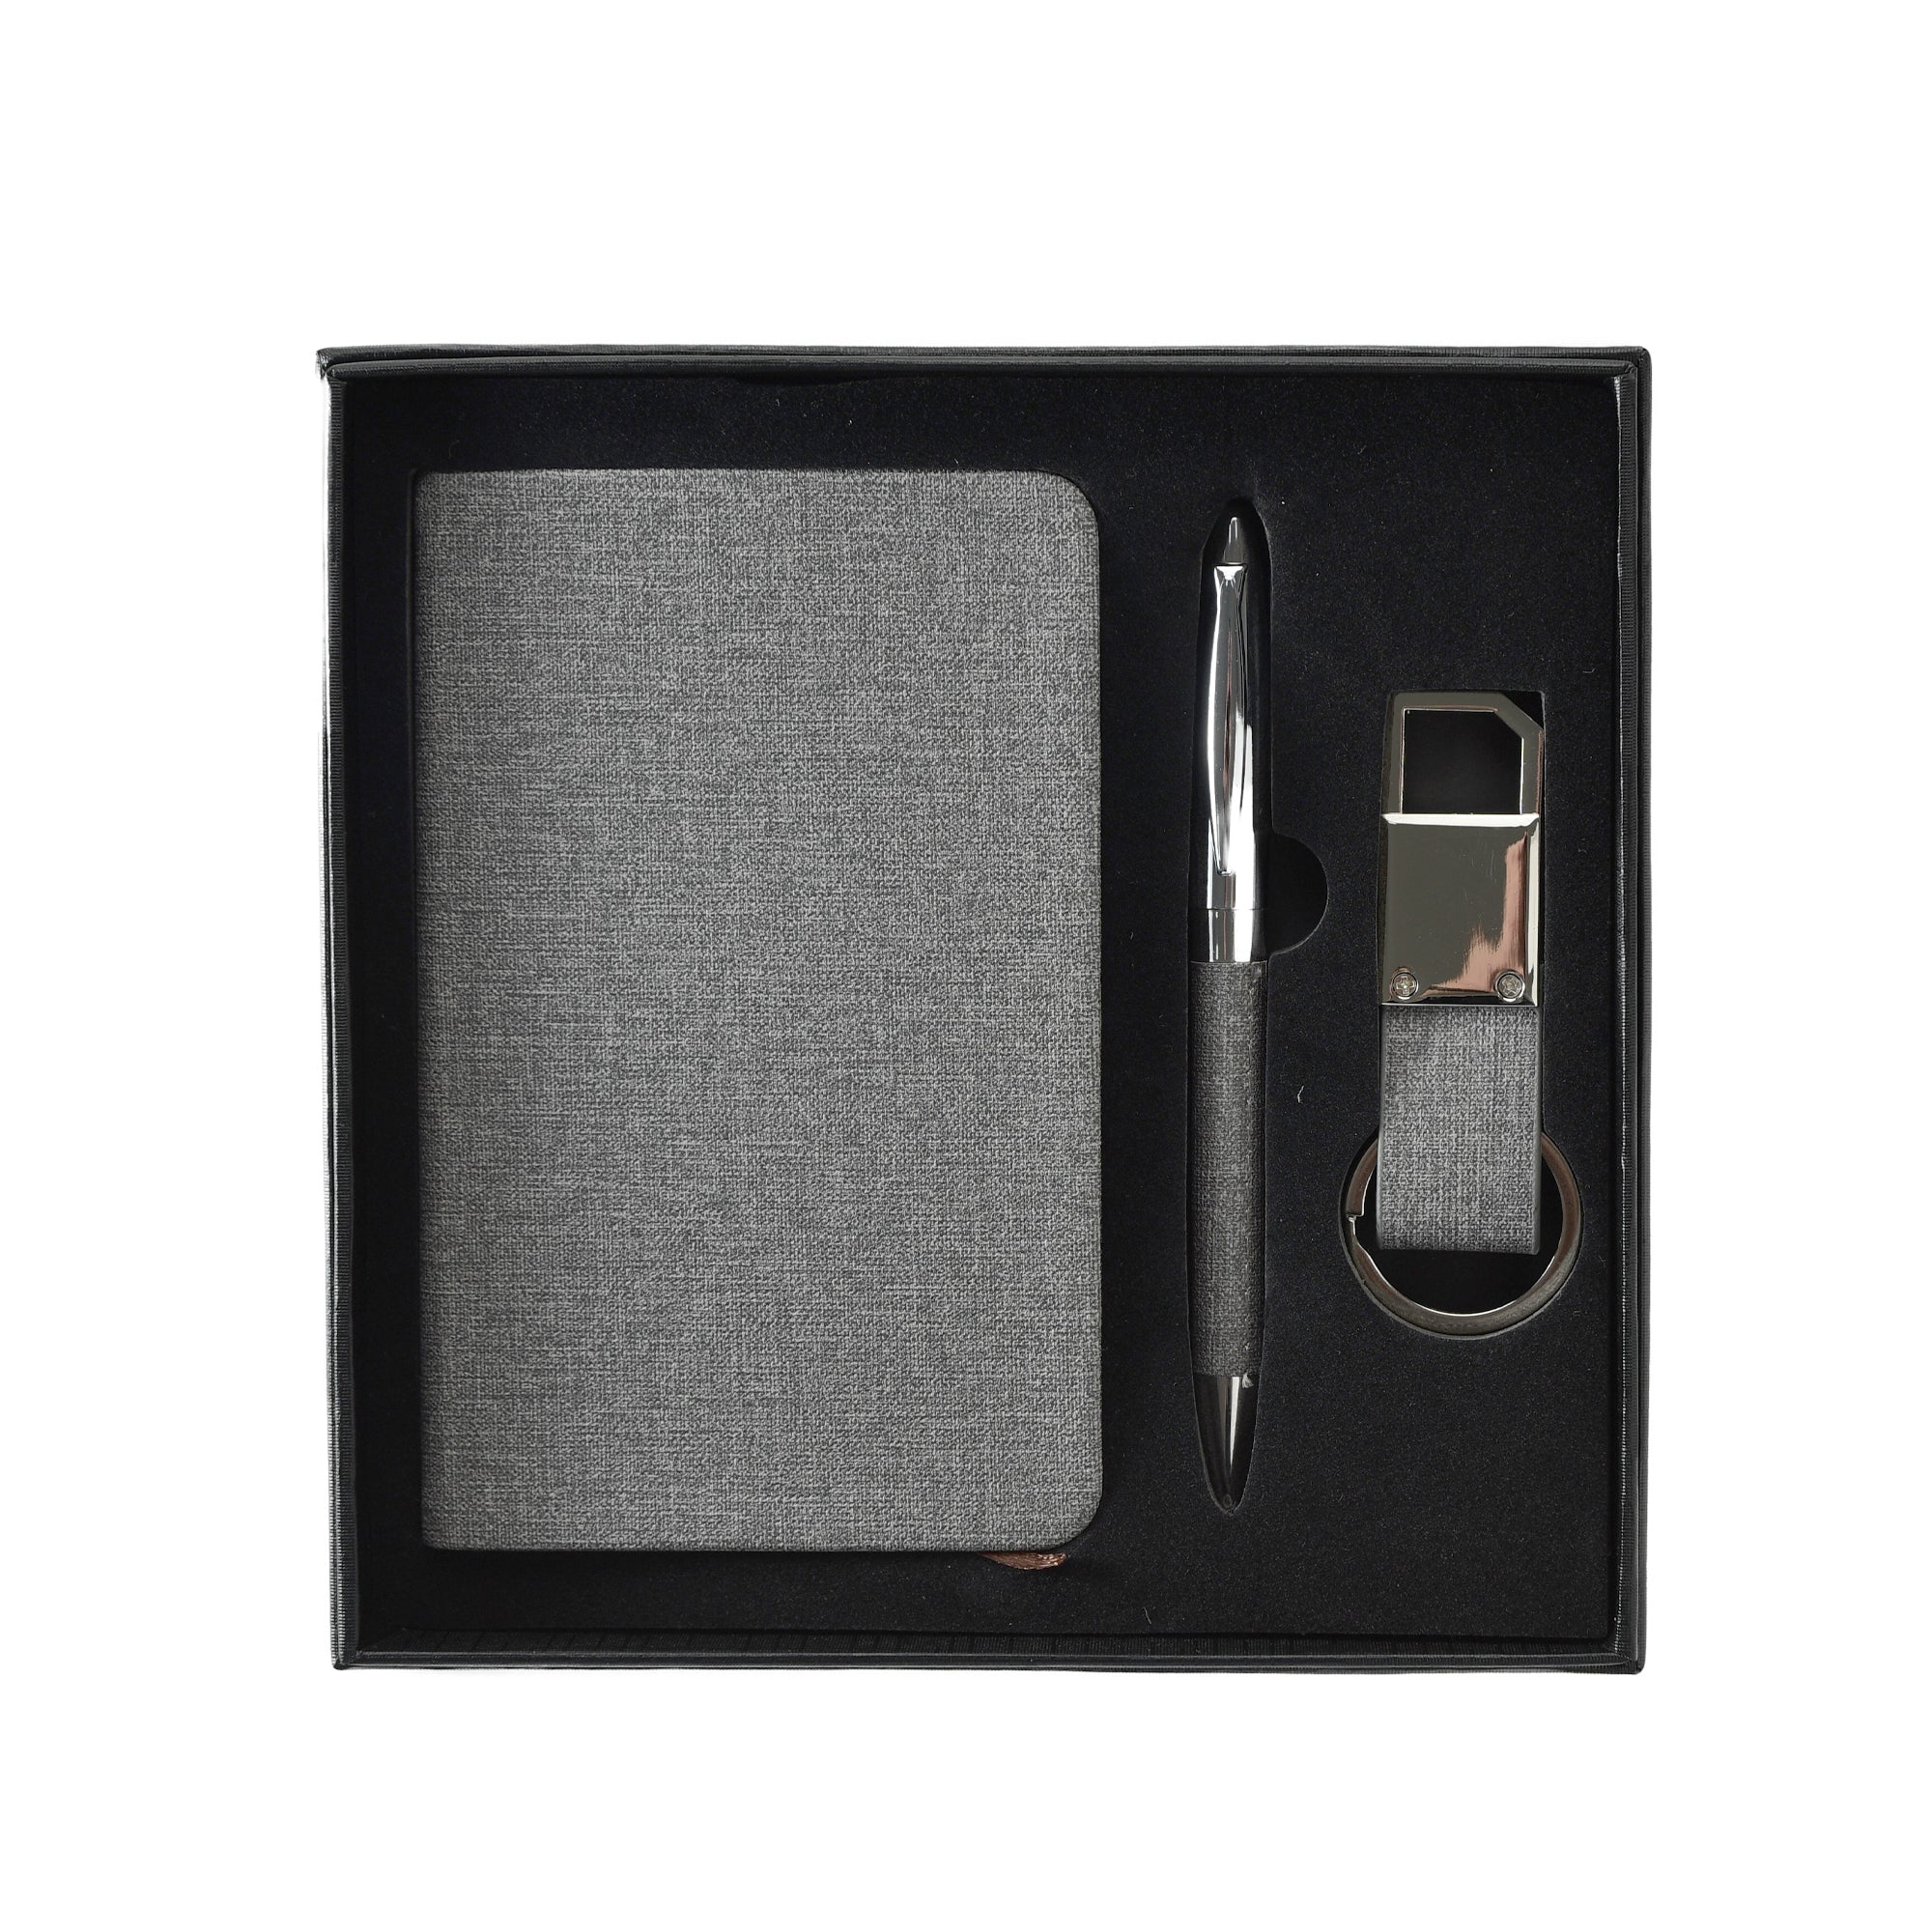 Set of Notebook, Pen, and Keychain